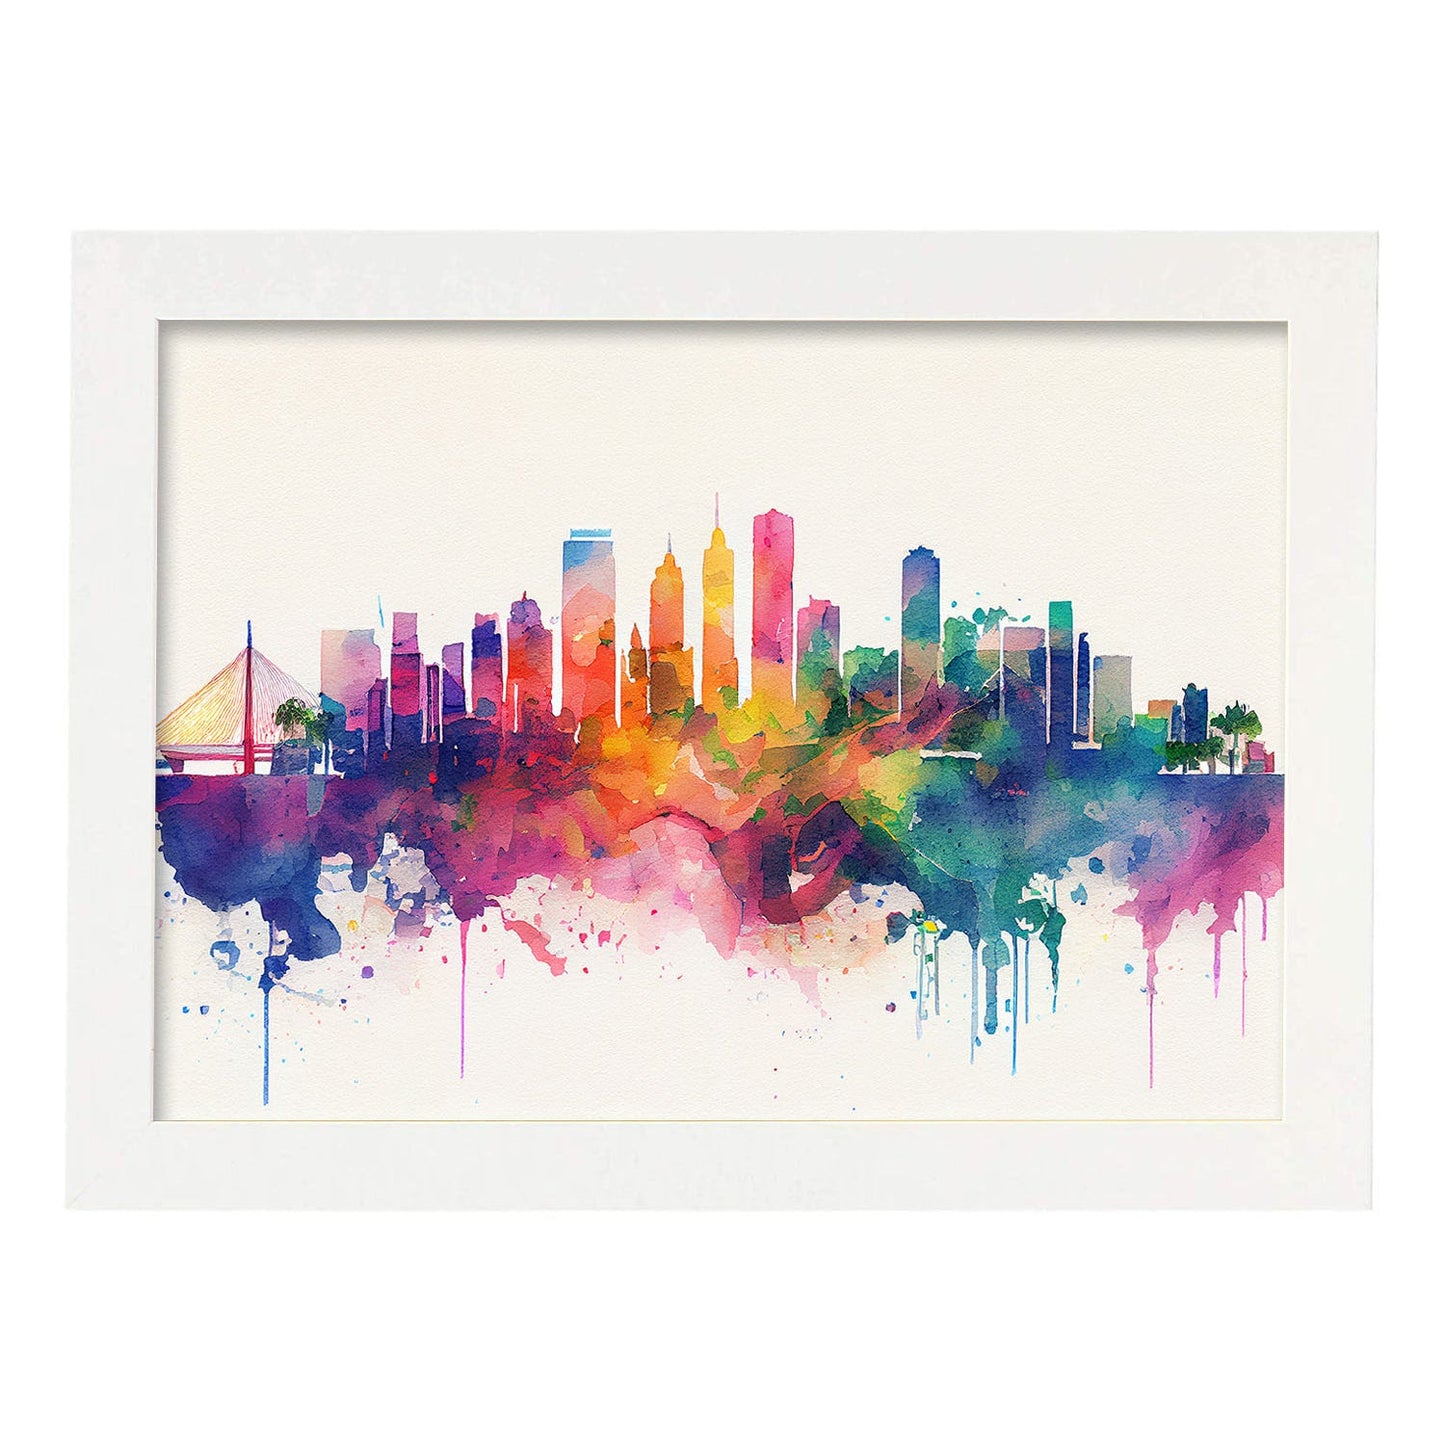 Nacnic watercolor of a skyline of the city of Manila_1. Aesthetic Wall Art Prints for Bedroom or Living Room Design.-Artwork-Nacnic-A4-Marco Blanco-Nacnic Estudio SL